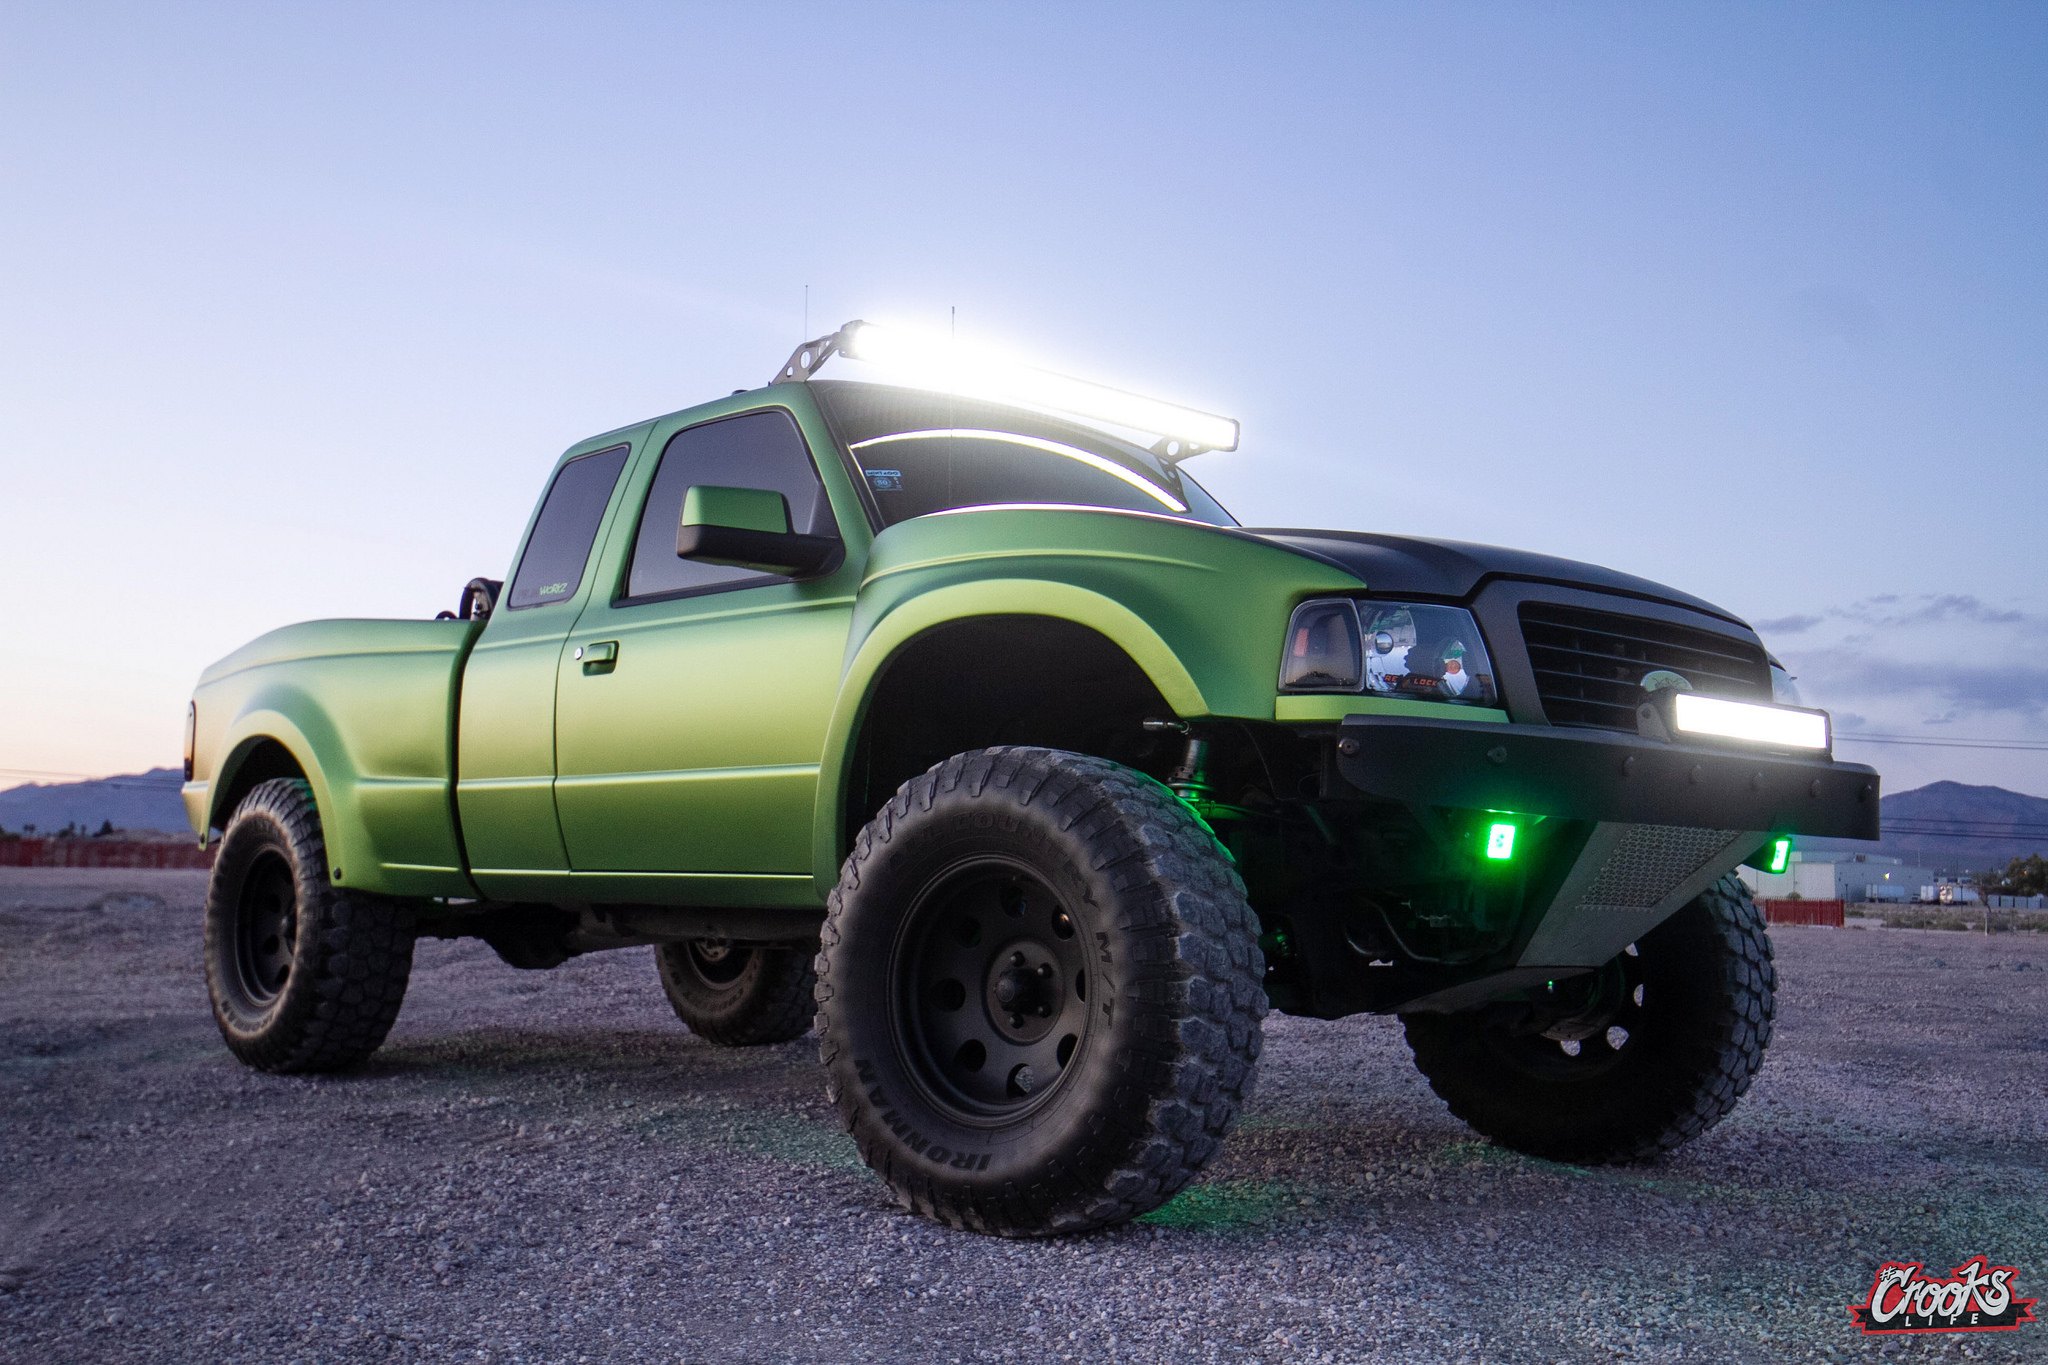 Metallic Green Ford Ranger with Off-road LED Light Bars - Photo by Jimmy Crook